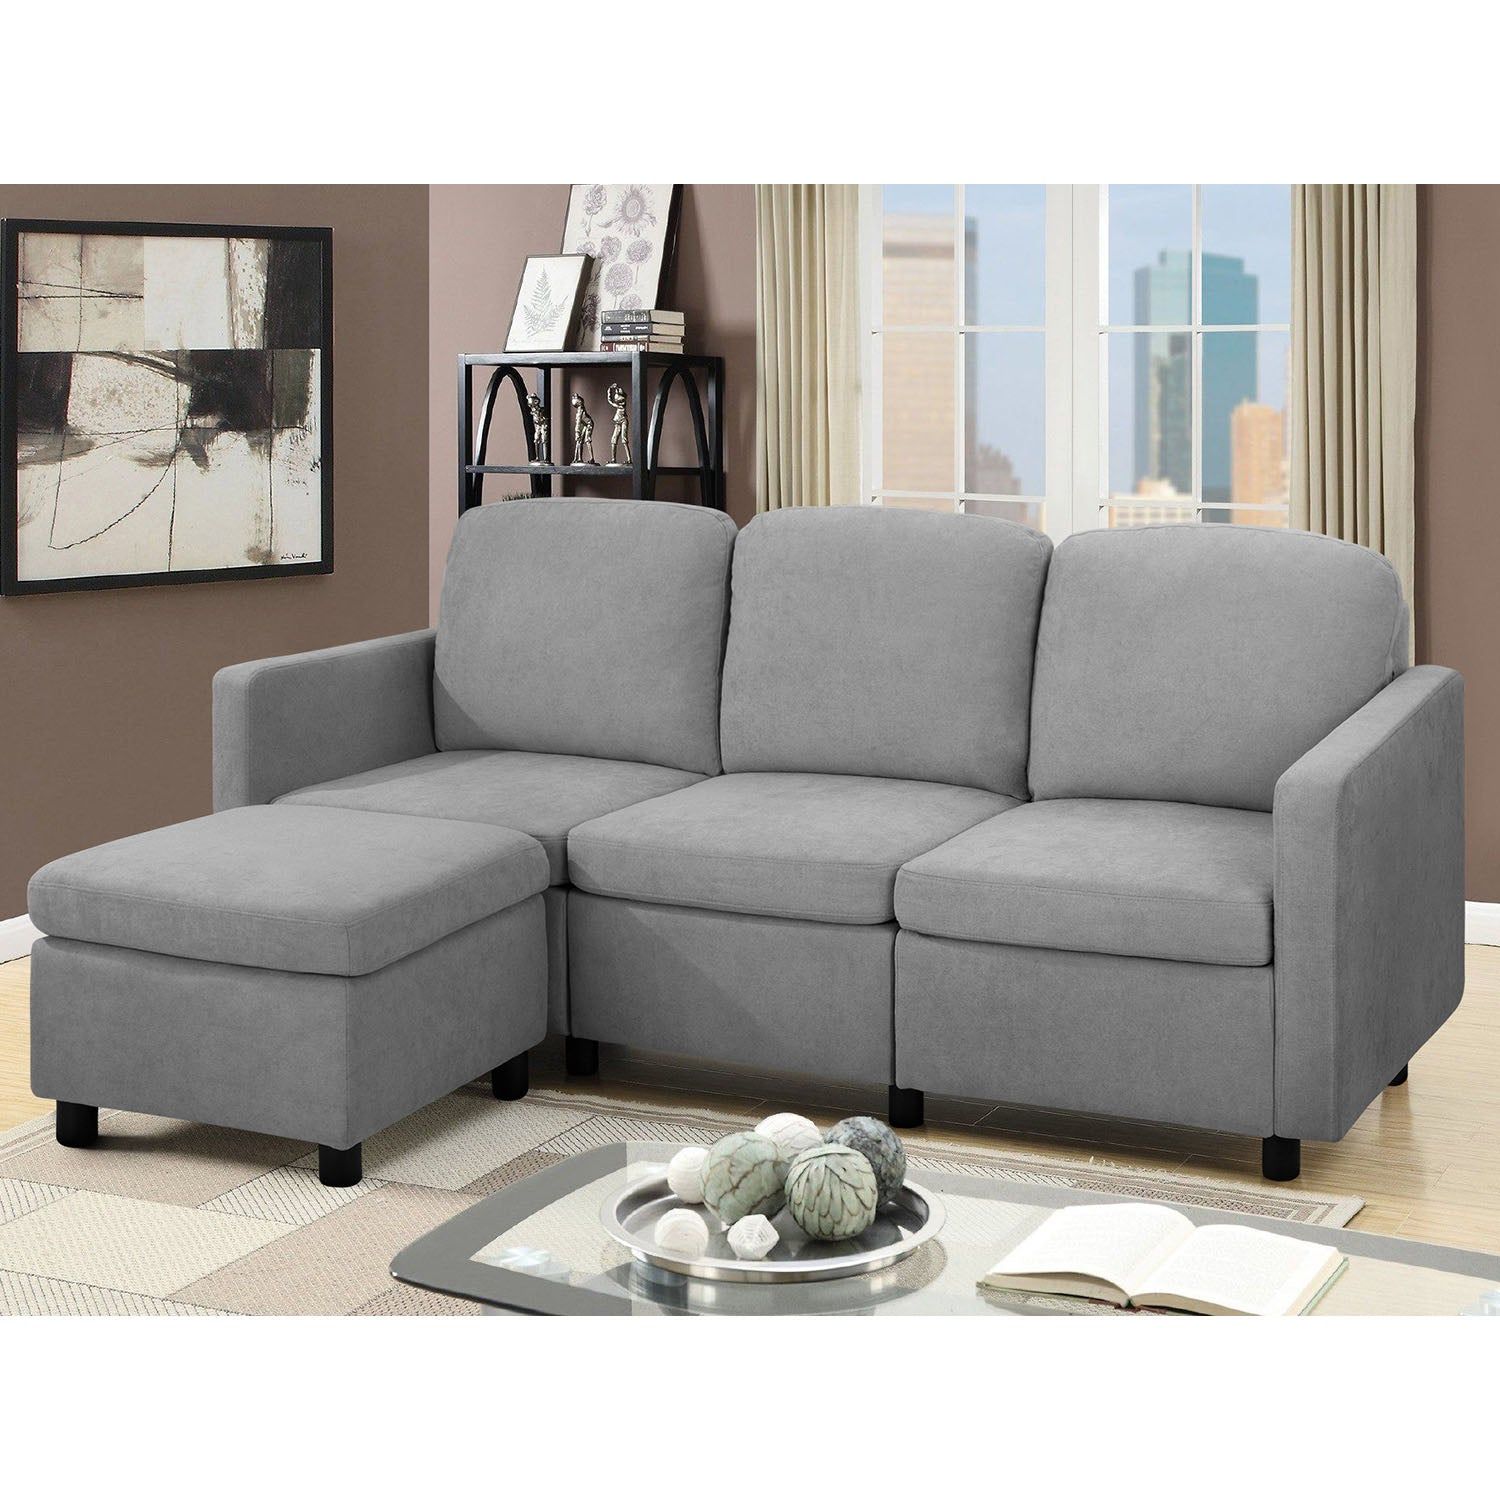 Homall Sectional Sofa Couch L Shaped Couch Modern Linen Fabric Convert With Regard To Convertible L Shaped Sectional Sofas (View 20 of 20)